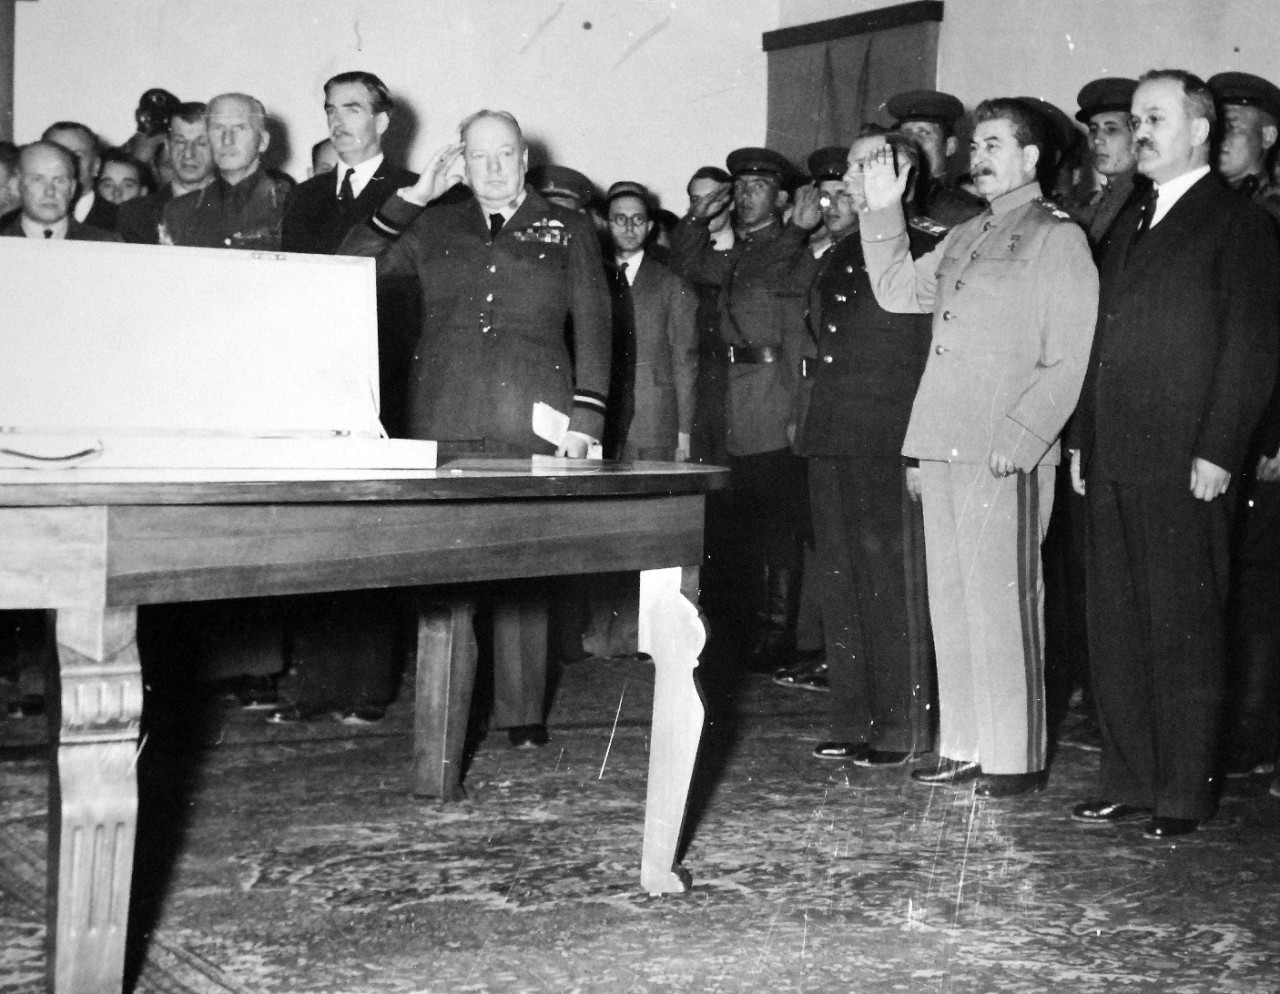 Lot 11597-4:  Tehran Conference, November-December 1943.   The presentation of the Stalingrad sword in the reception room of the Russian embassy.  Prime Minister Winston Churchill and Marshal Josef Stalin, hand upraised, during the playing of the Russian national anthem.  Anthony Eden is behind the Prime Minister; Stalin is flanked by General Voroshilov (right) and Foreign Minister Molotov, (left).  The sword was presented to the people of Stalingrad as a token of the regard and admiration of the British people for the gallant defense of the city. Note, V. M. Molotov, Peoples’ Commissar for Foreign Affairs, to Stalin’s right.  U.S. Army photograph from the collection of the Office of War Information.  Courtesy of the Library of Congress.    (2016/01/15).